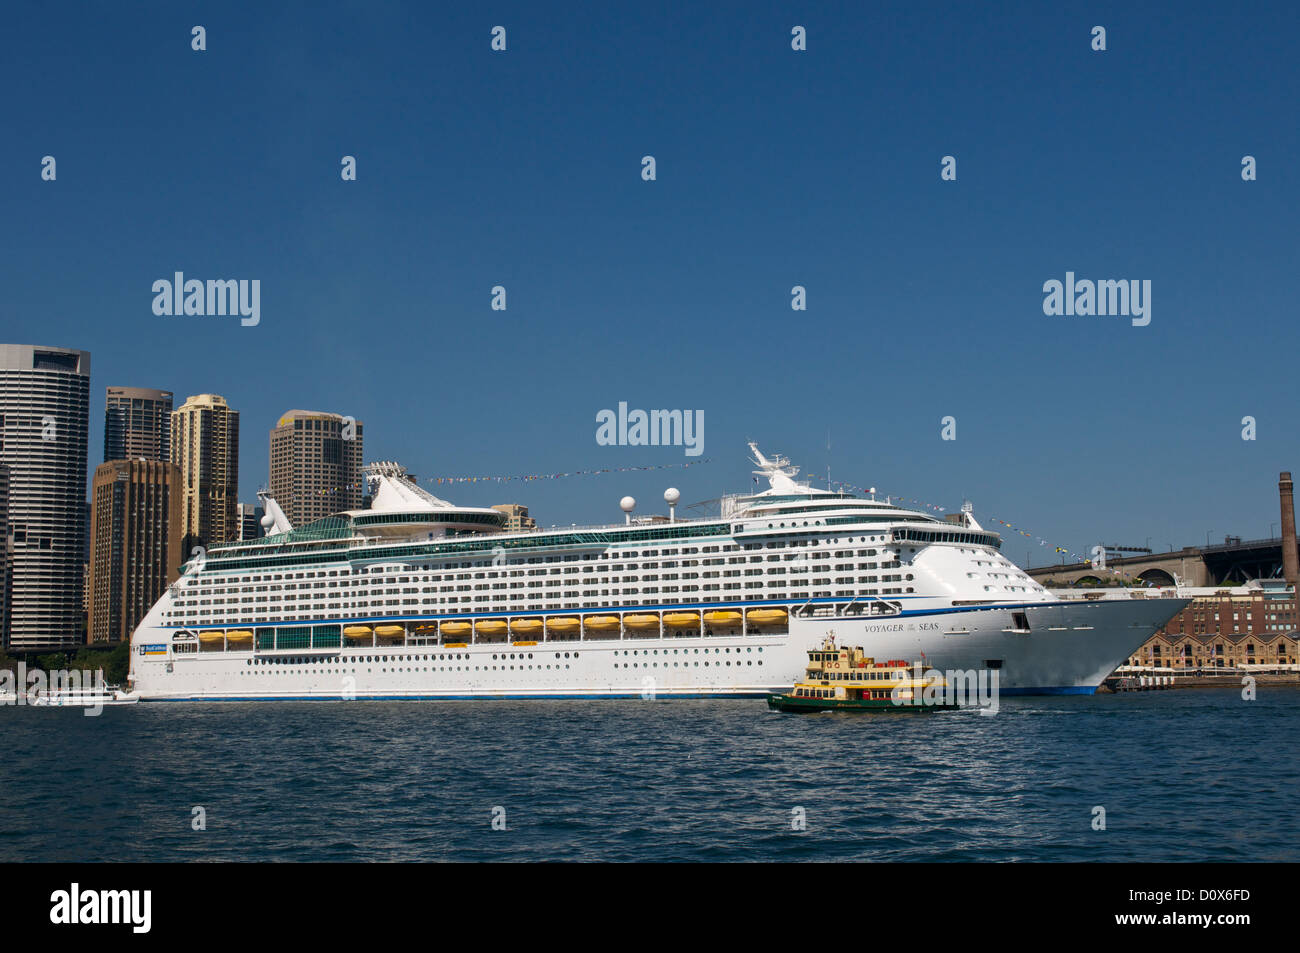 Cruise liner 'Voyager of the Seas' berthed in Circular Quay Sydney Australia Stock Photo